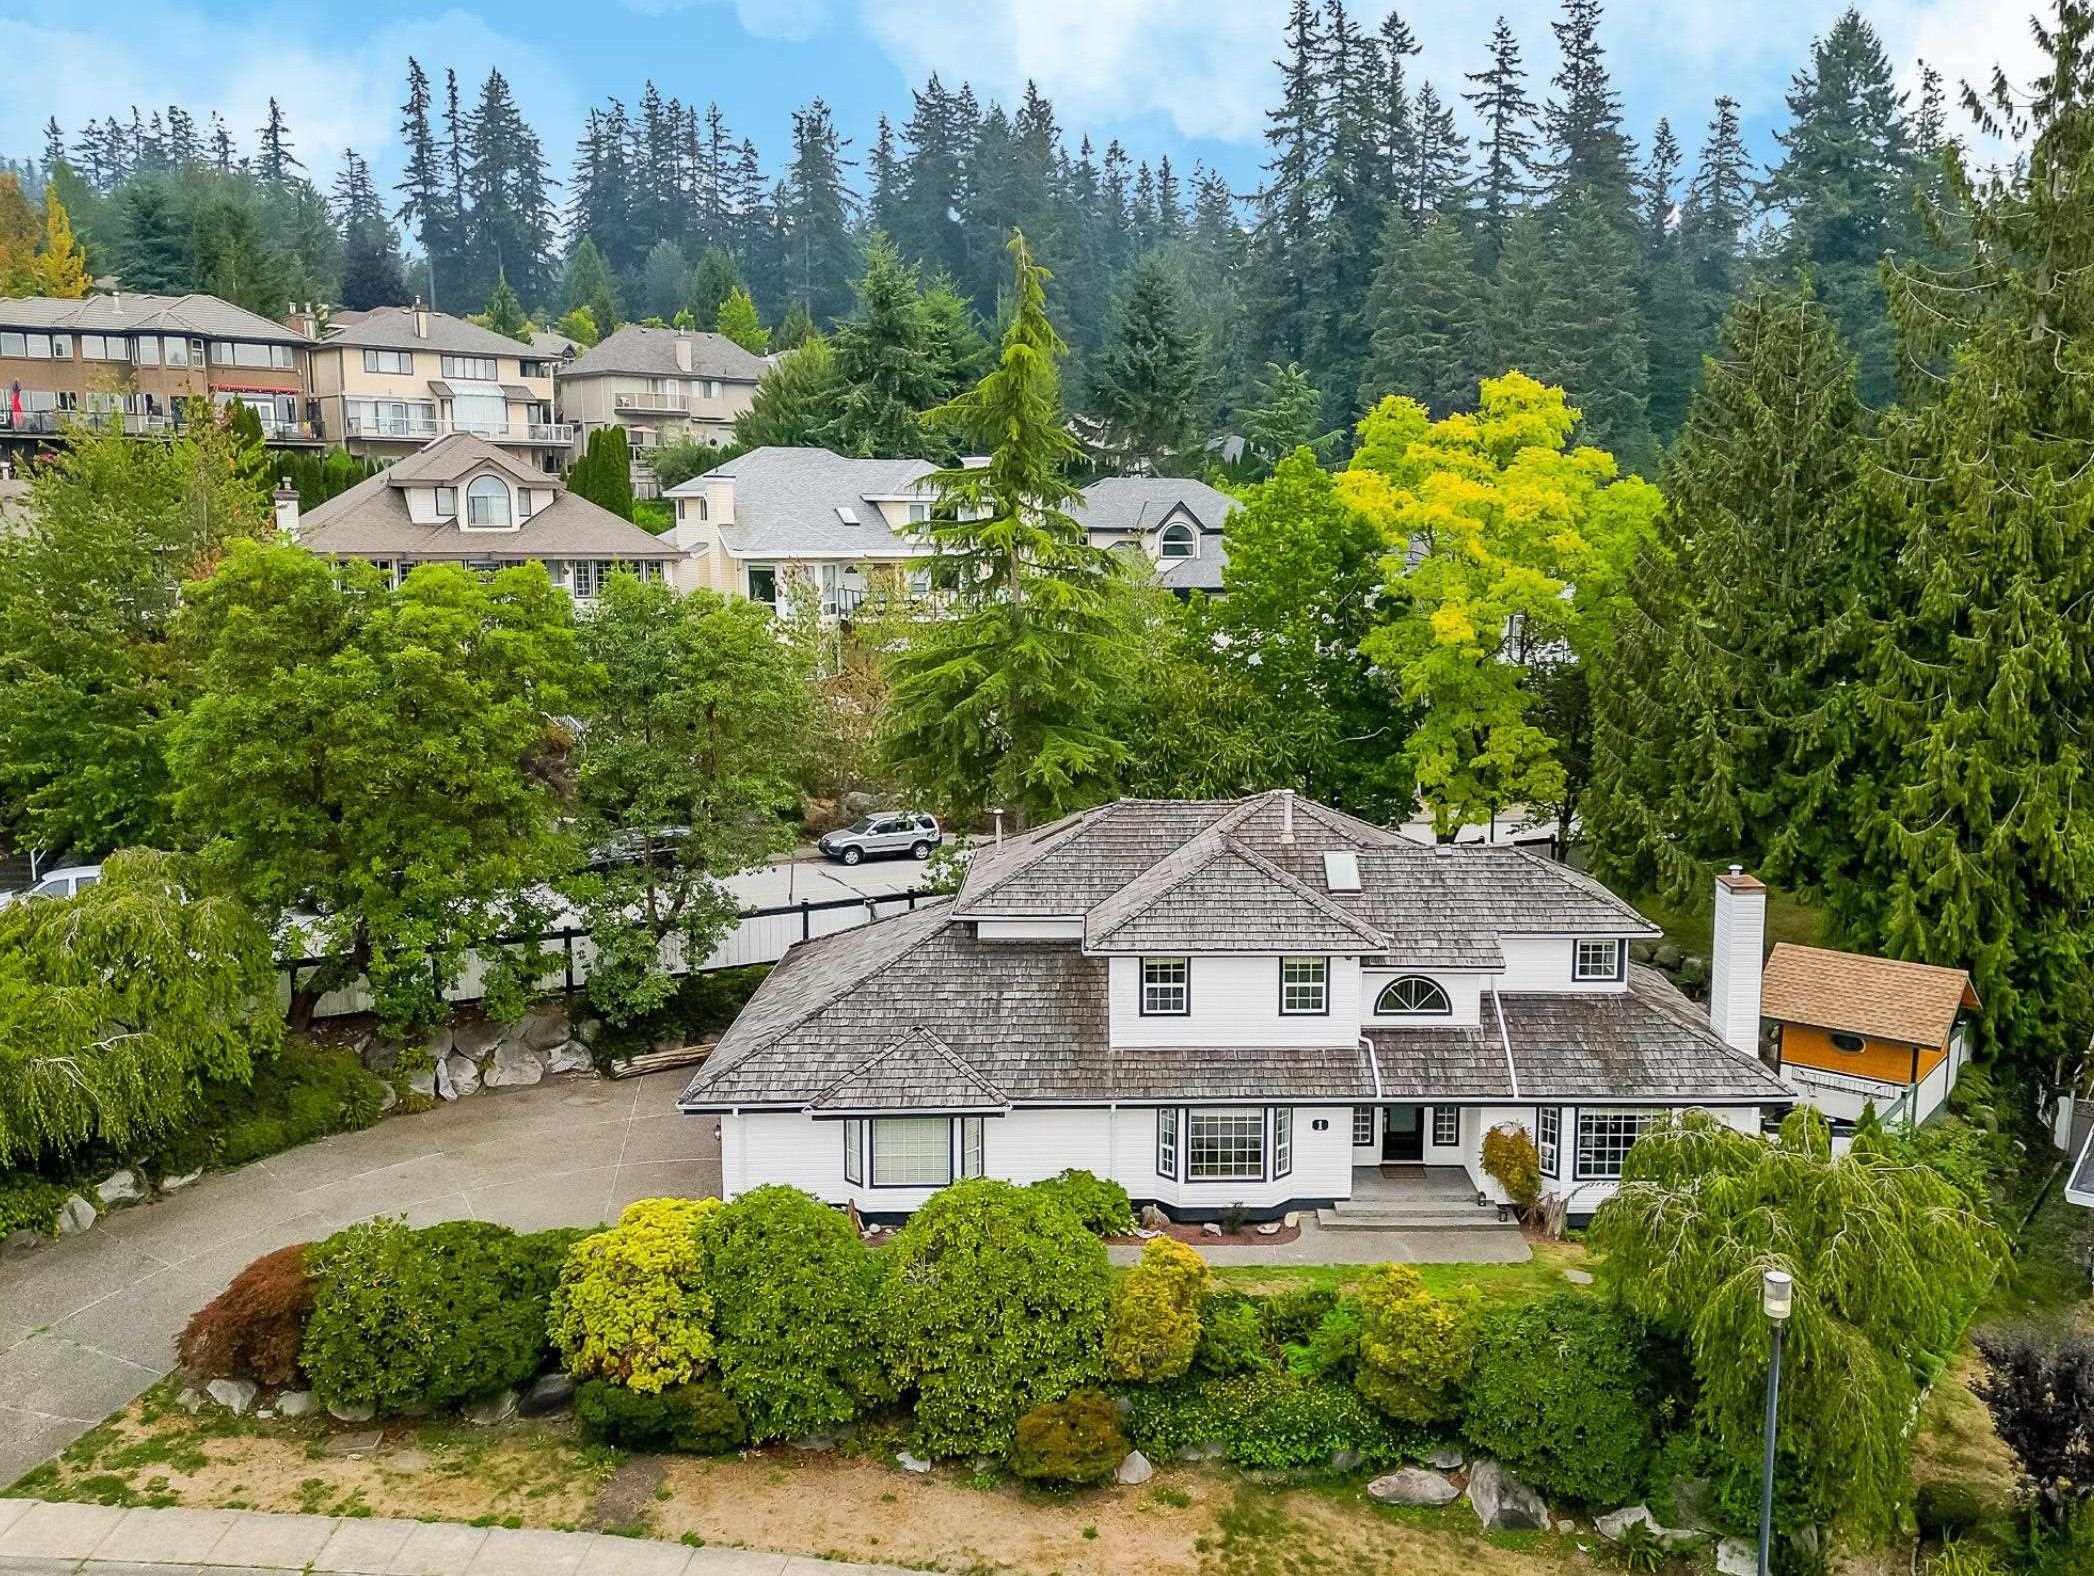 This property has sold: 1 WILDWOOD DR in Port Moody